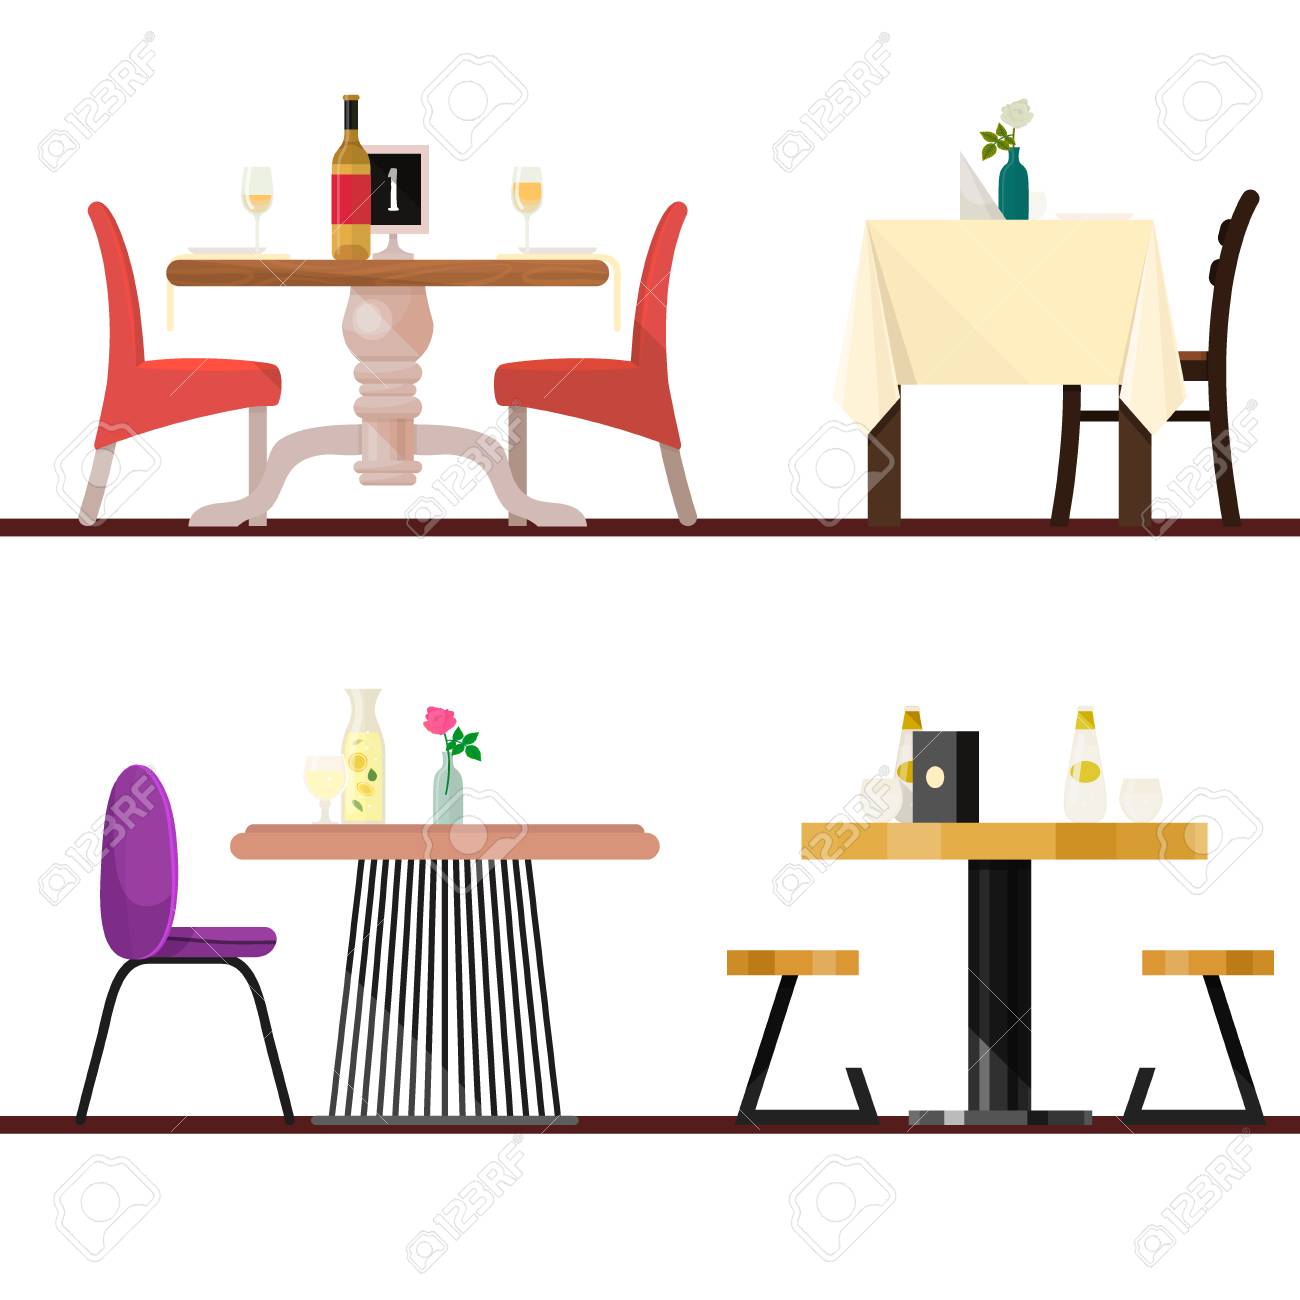 Cafe tables in restaurant setting vector dining furniture table...